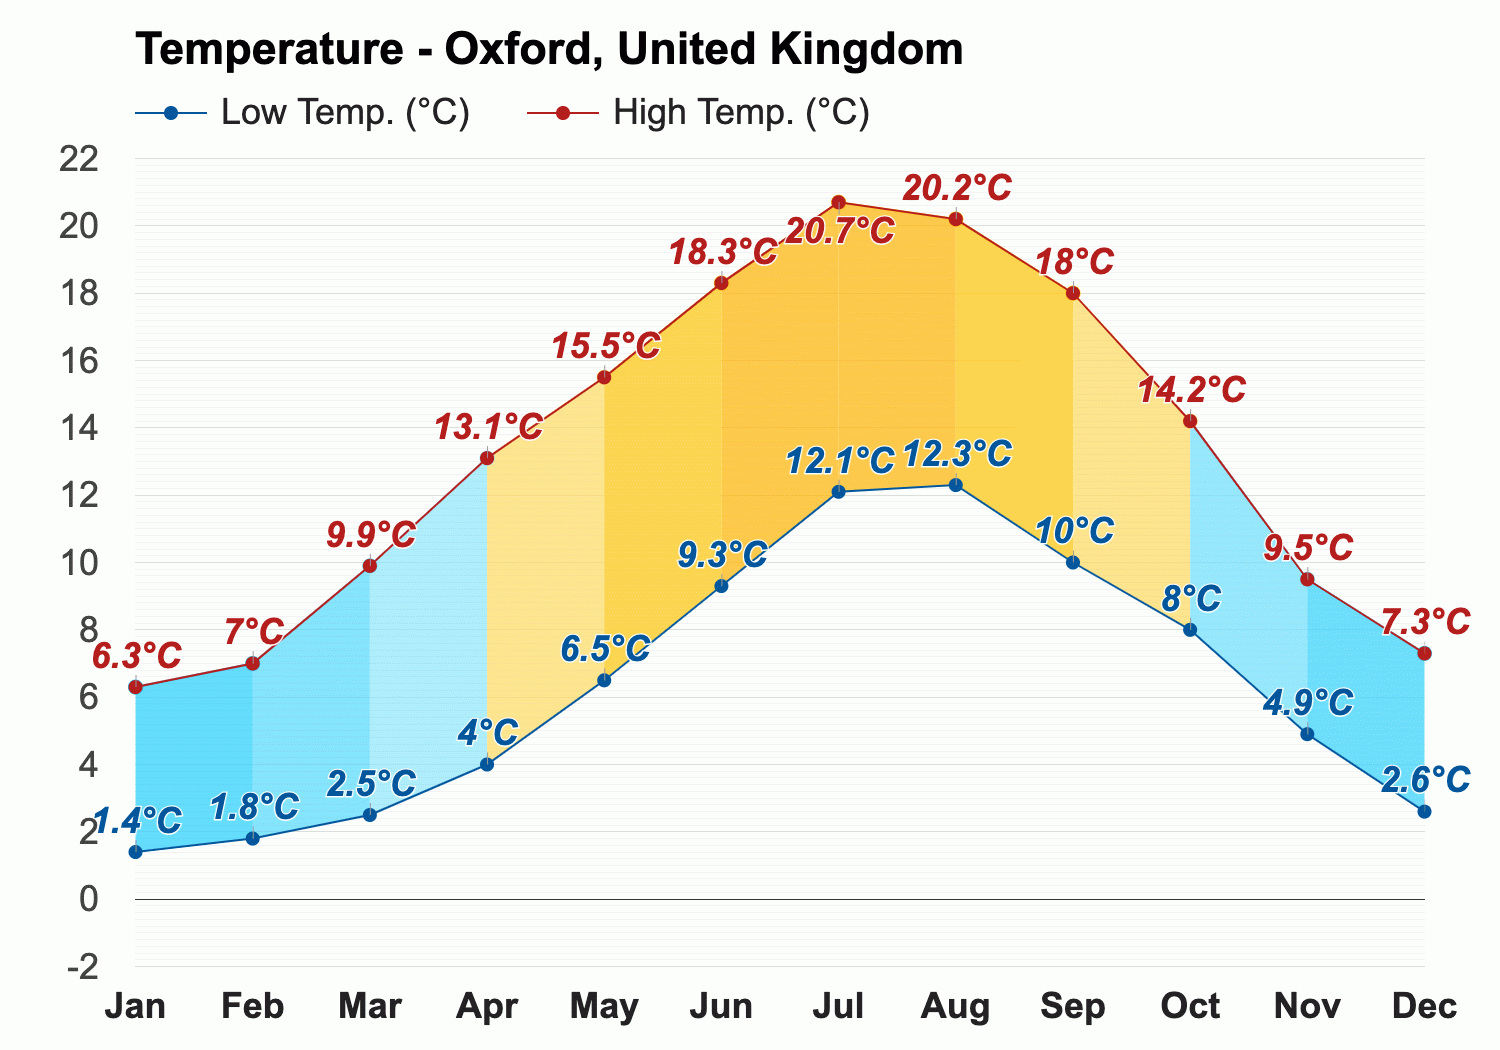 Oxford, United Kingdom - Yearly & Monthly weather forecast